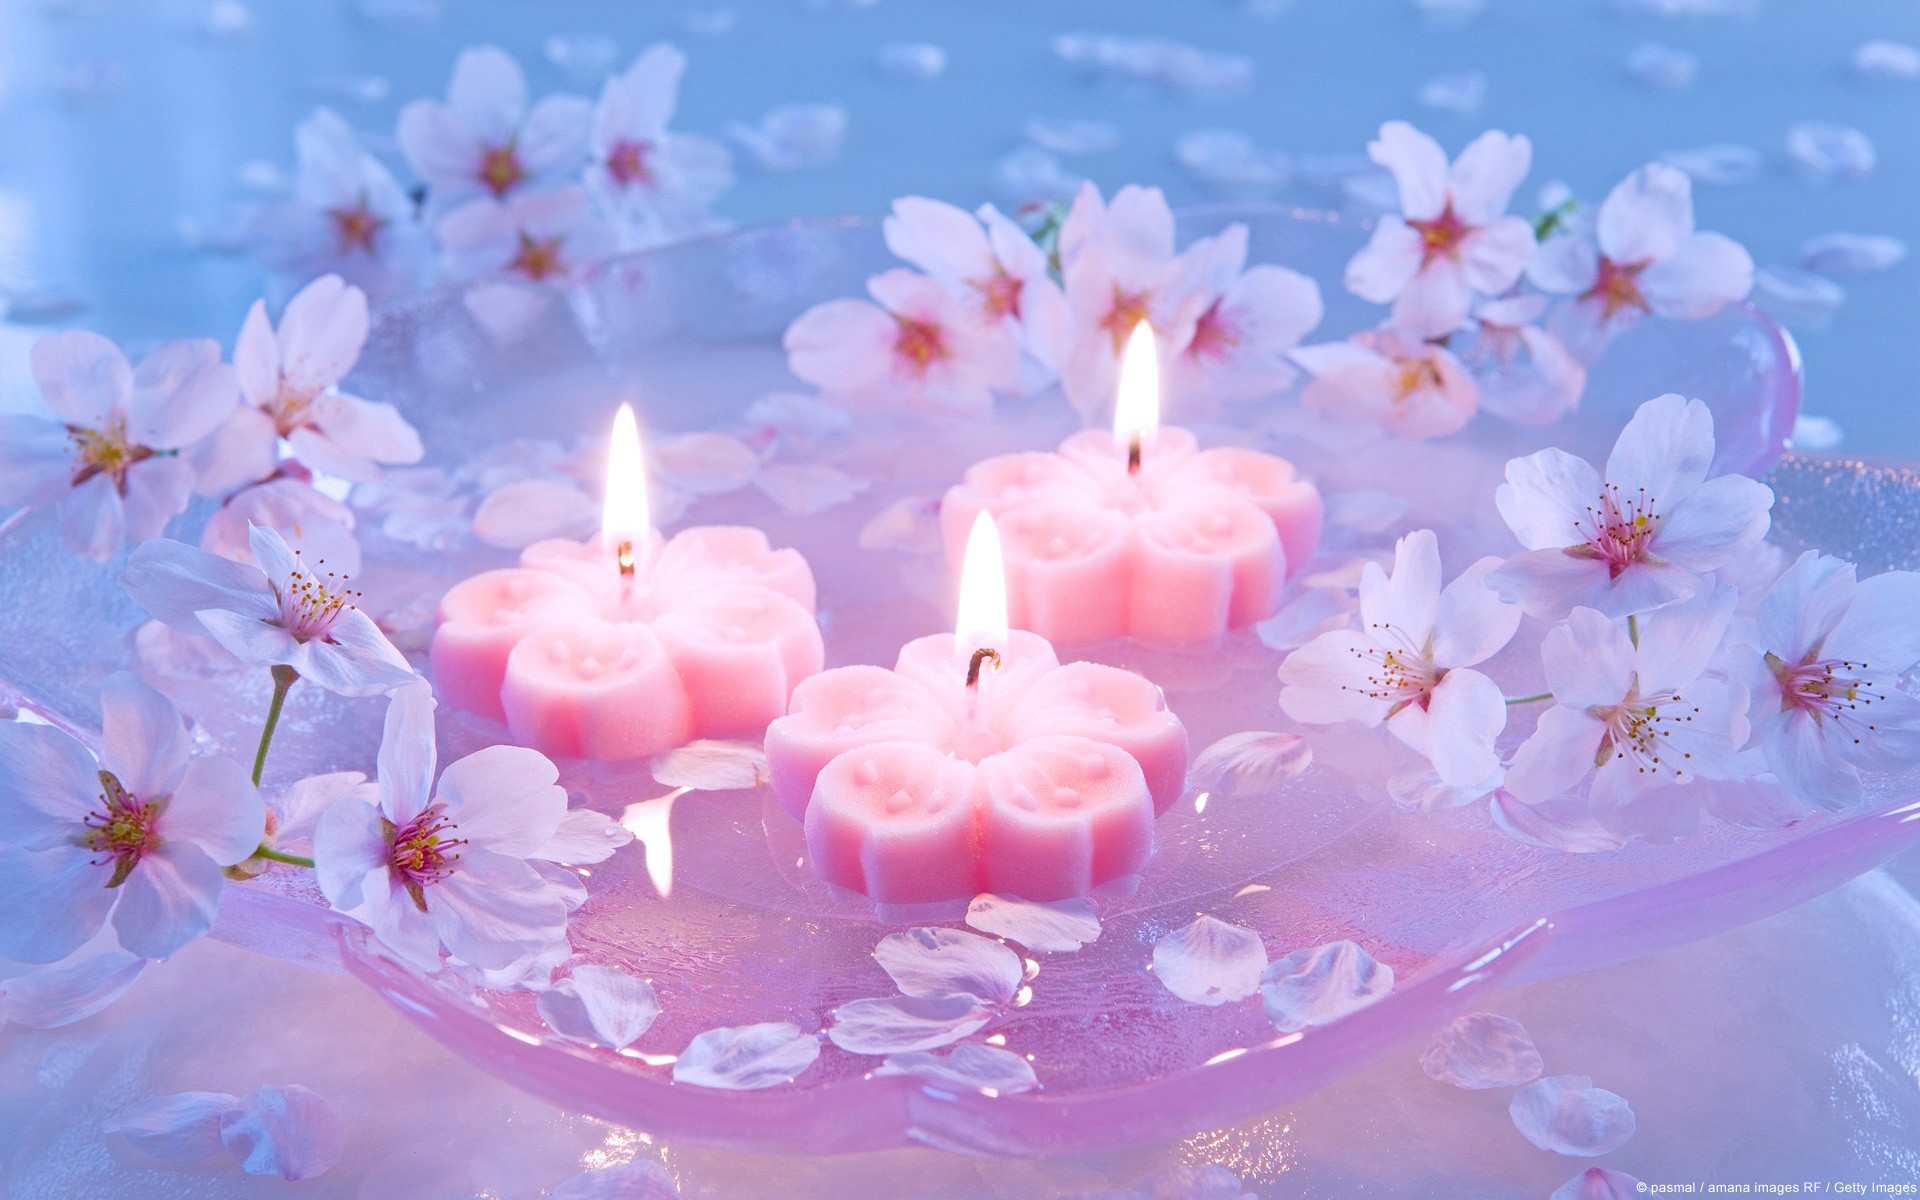 Burning candles among the flowers wallpapers and images ...